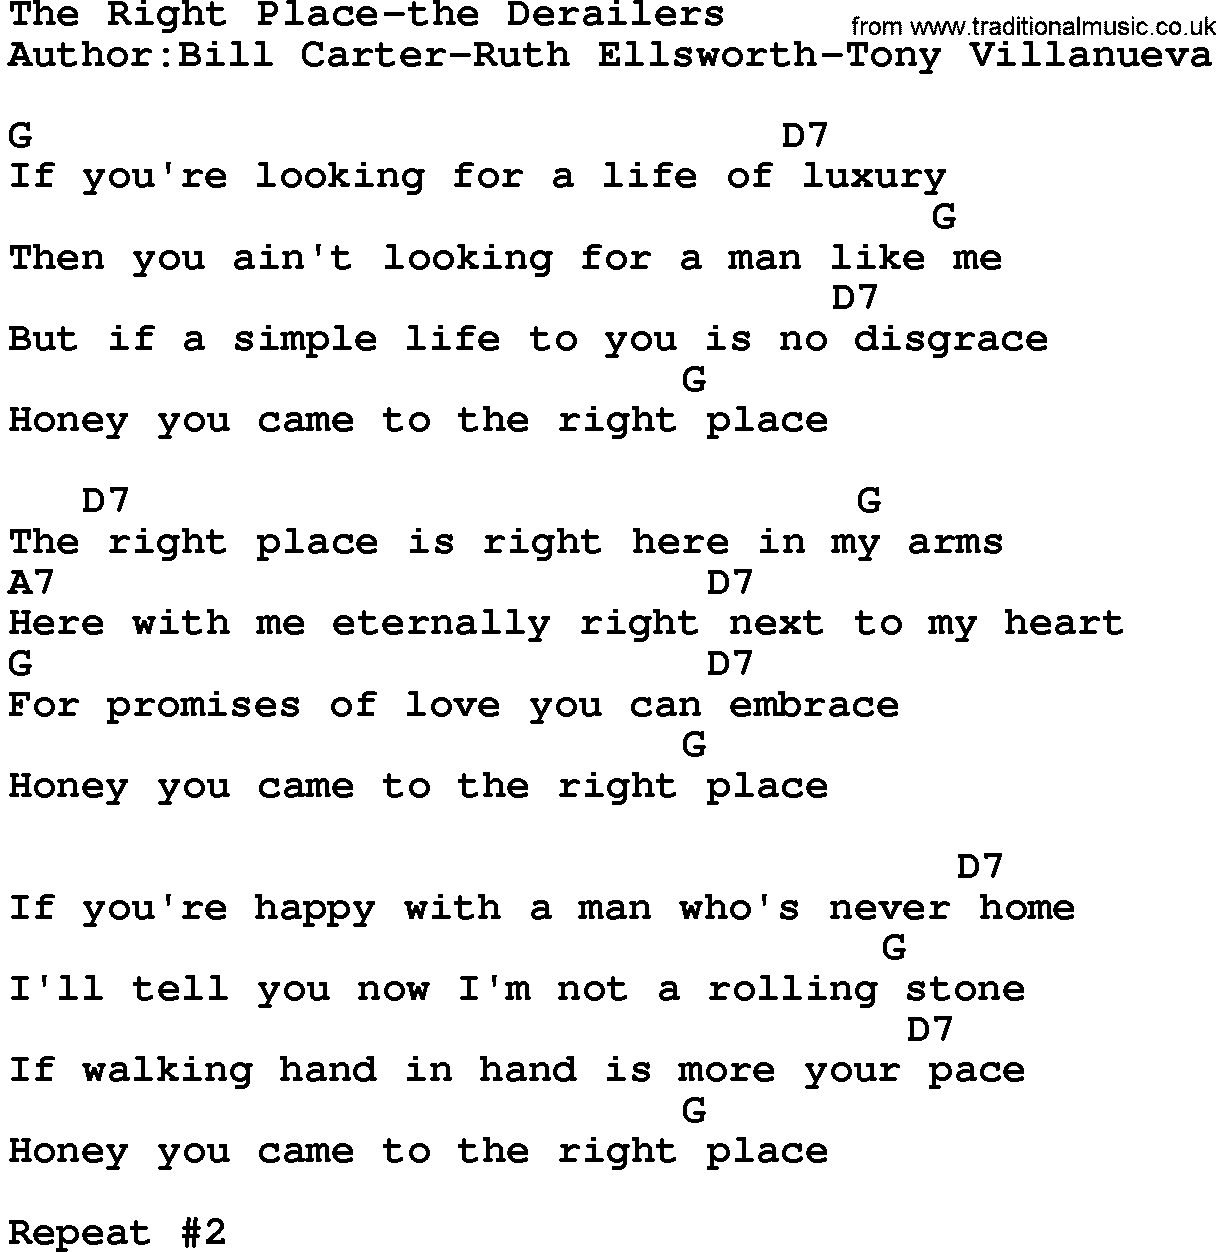 Country music song: The Right Place-The Derailers lyrics and chords